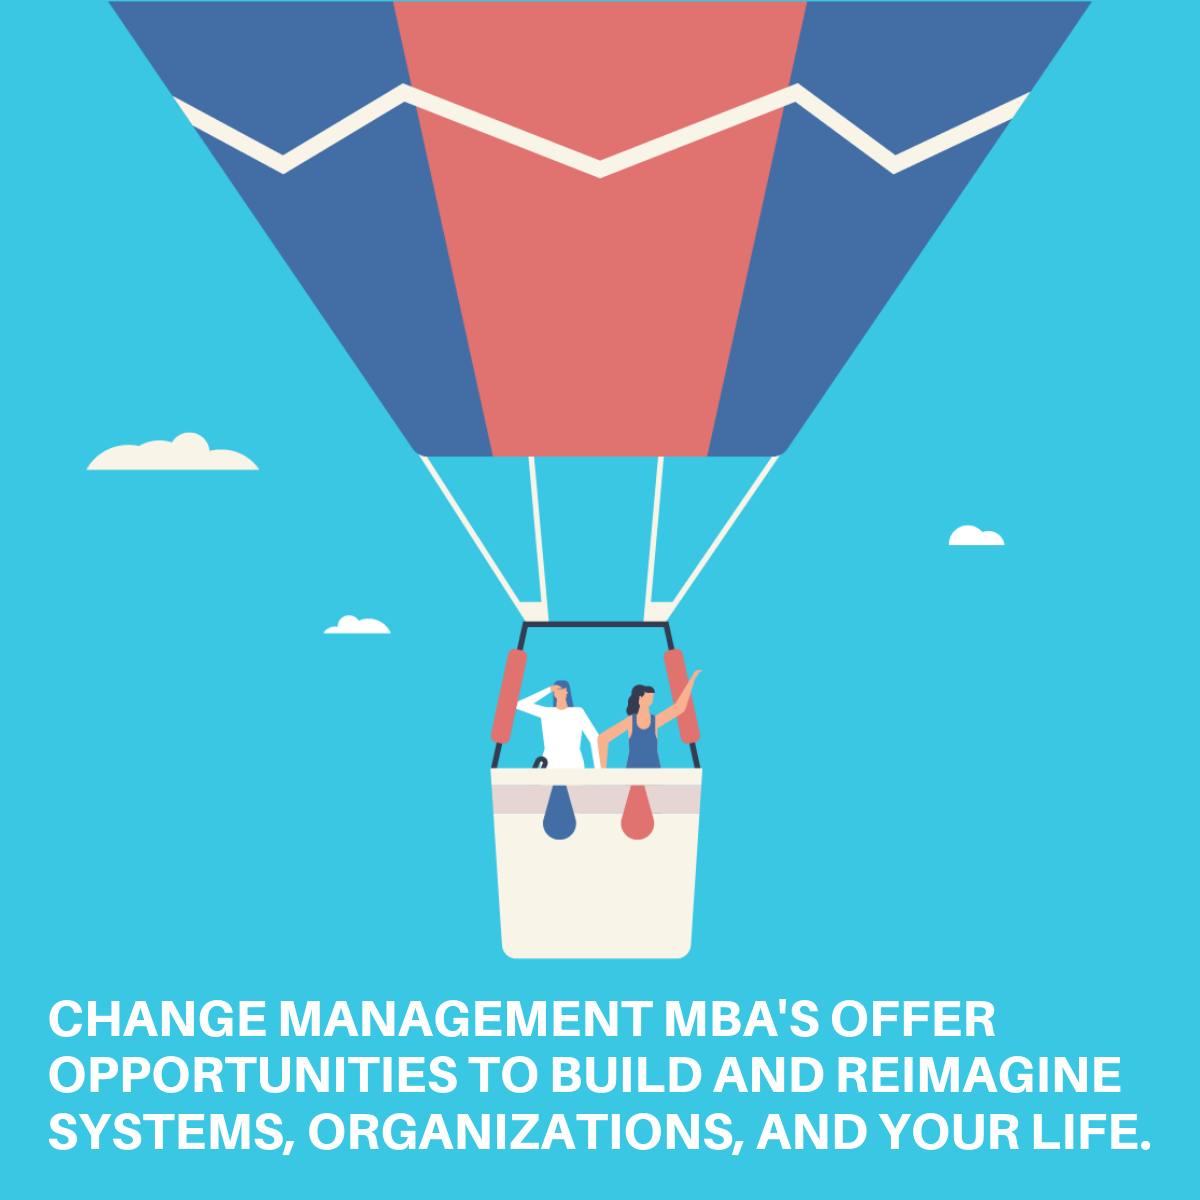 Change management MBA's offer opportunities to build and reimagine systems, organizations, and your life.